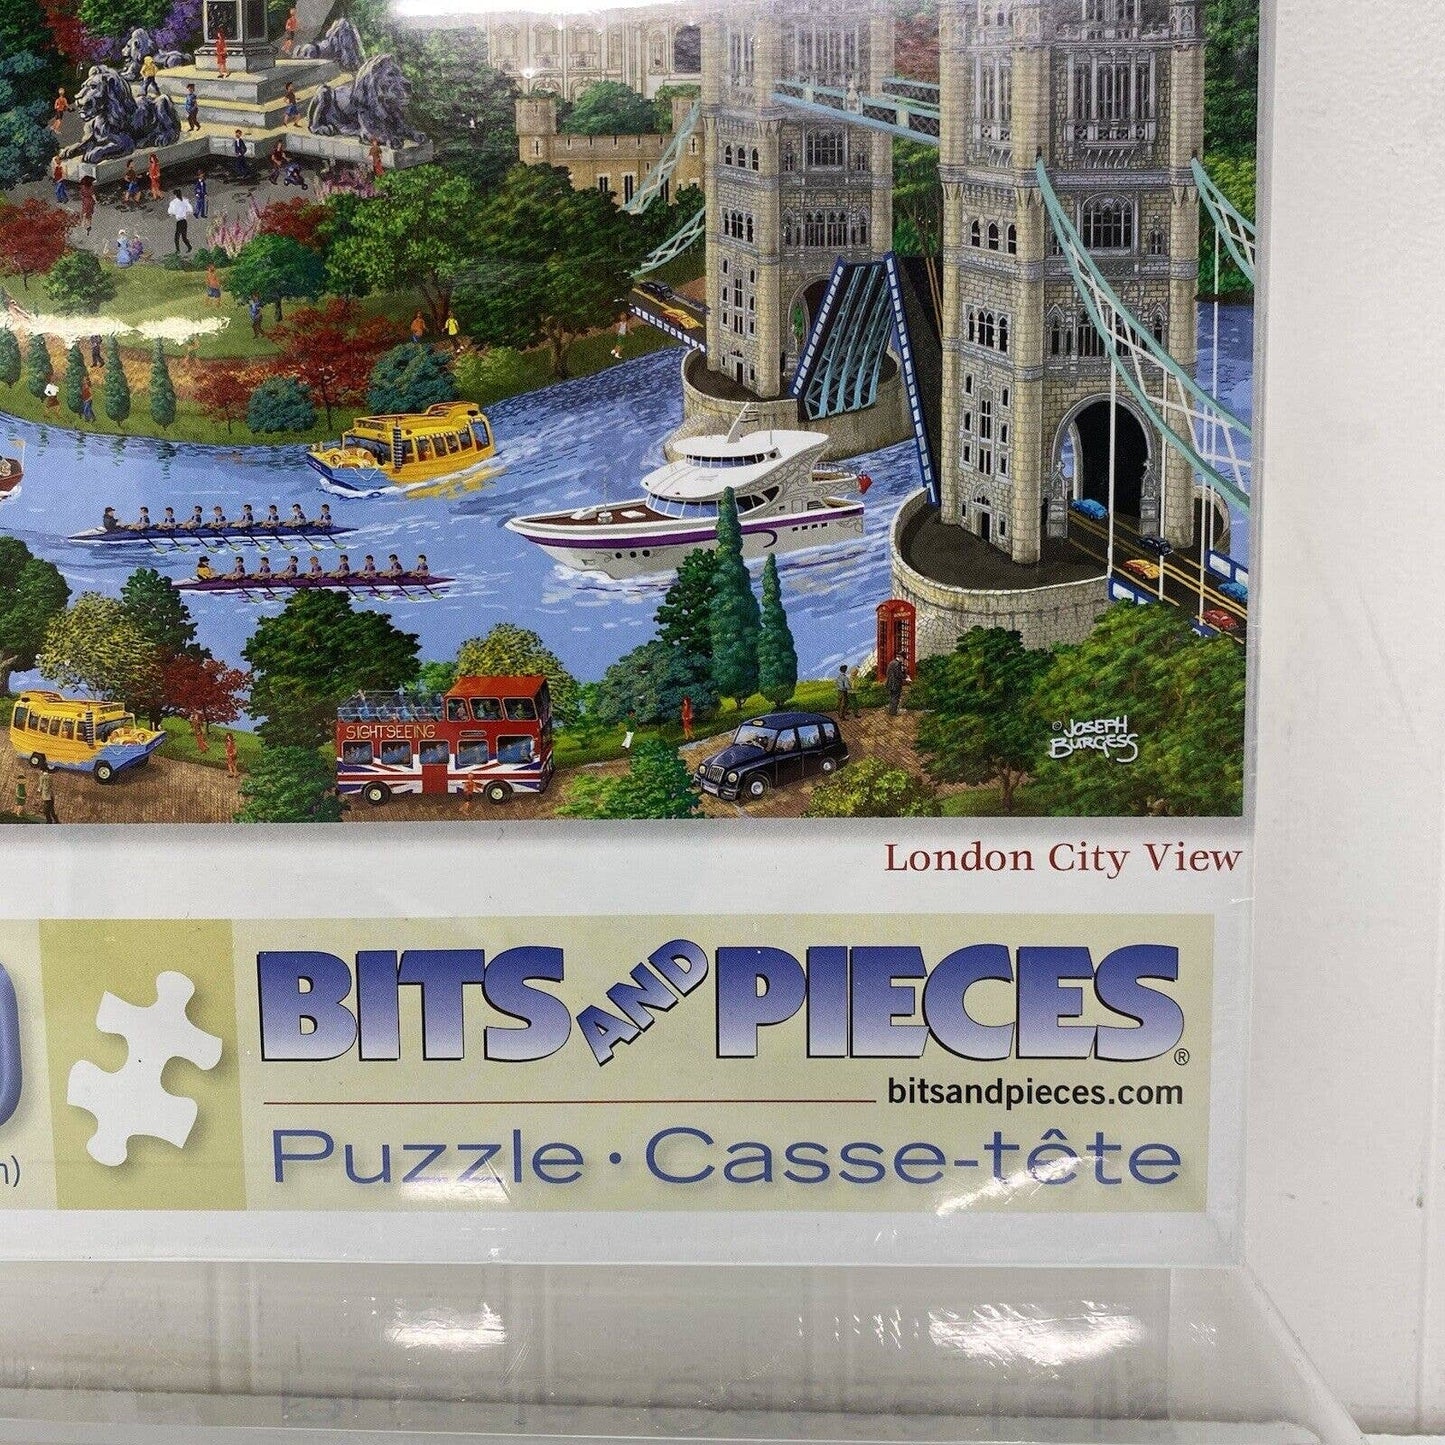 Lot of 4 Factory Sealed 1000 Piece Jigsaw Puzzles - Bits and Pieces, Etc.